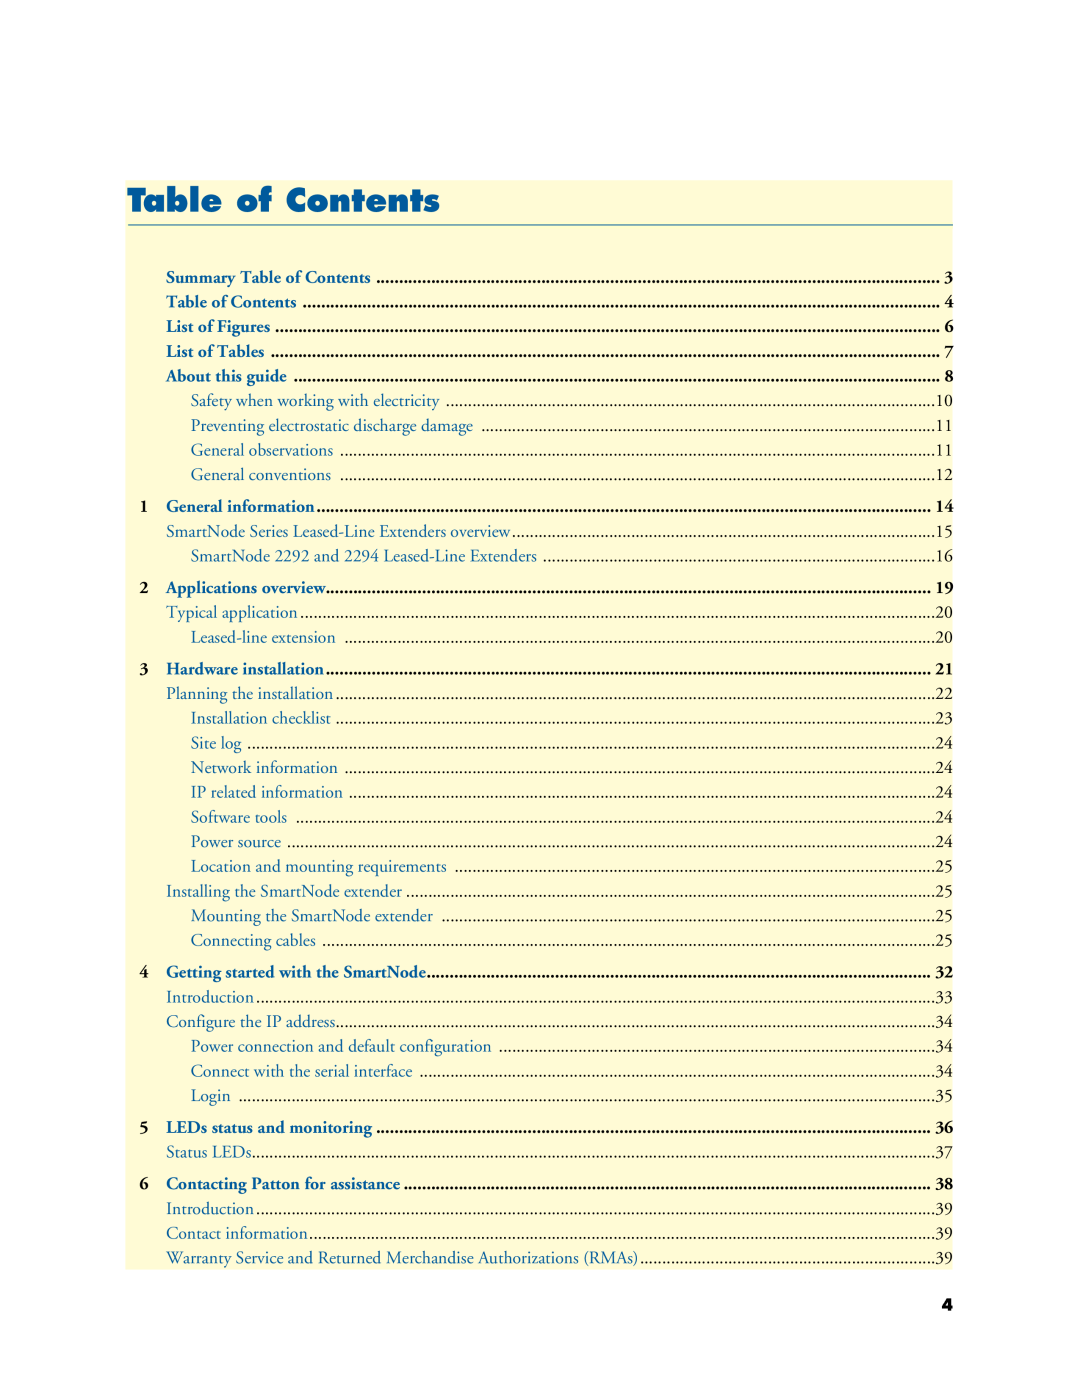 Patton electronic 2294, 2292 manual Table of Contents 